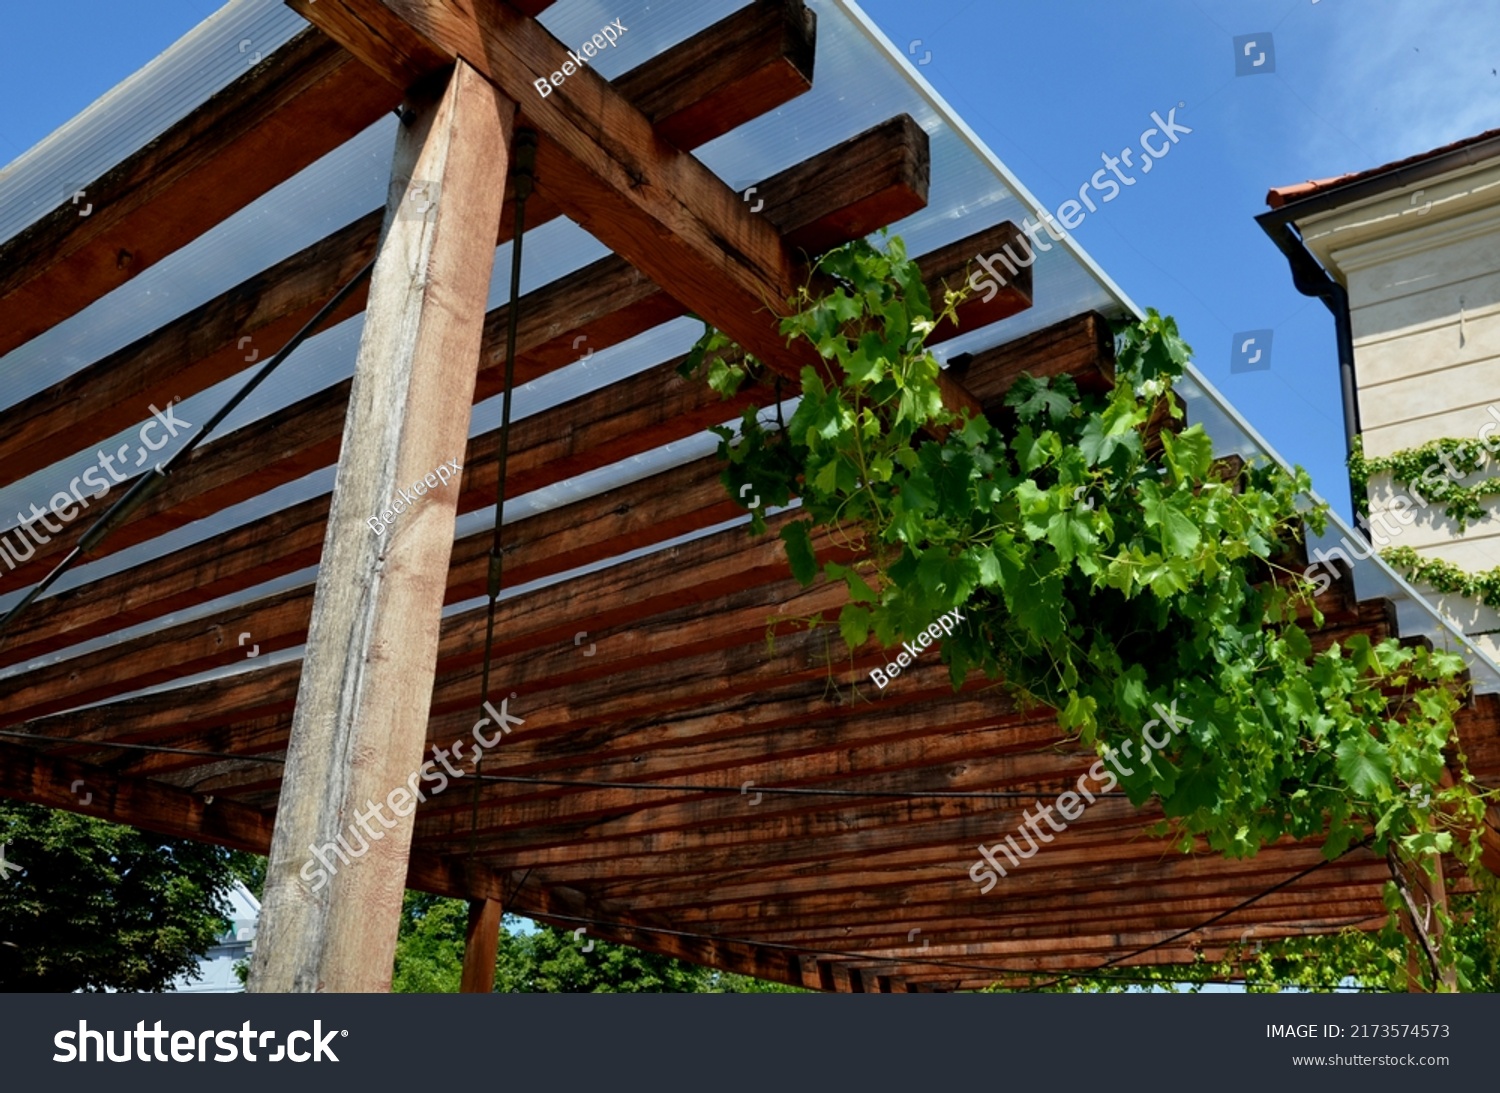 terrace with wooden pergola and plexiglass roof. vines are straining, crawling under the beams. garden or park. sitting with dry wall wine region. restaurant countryside france, truss #2173574573